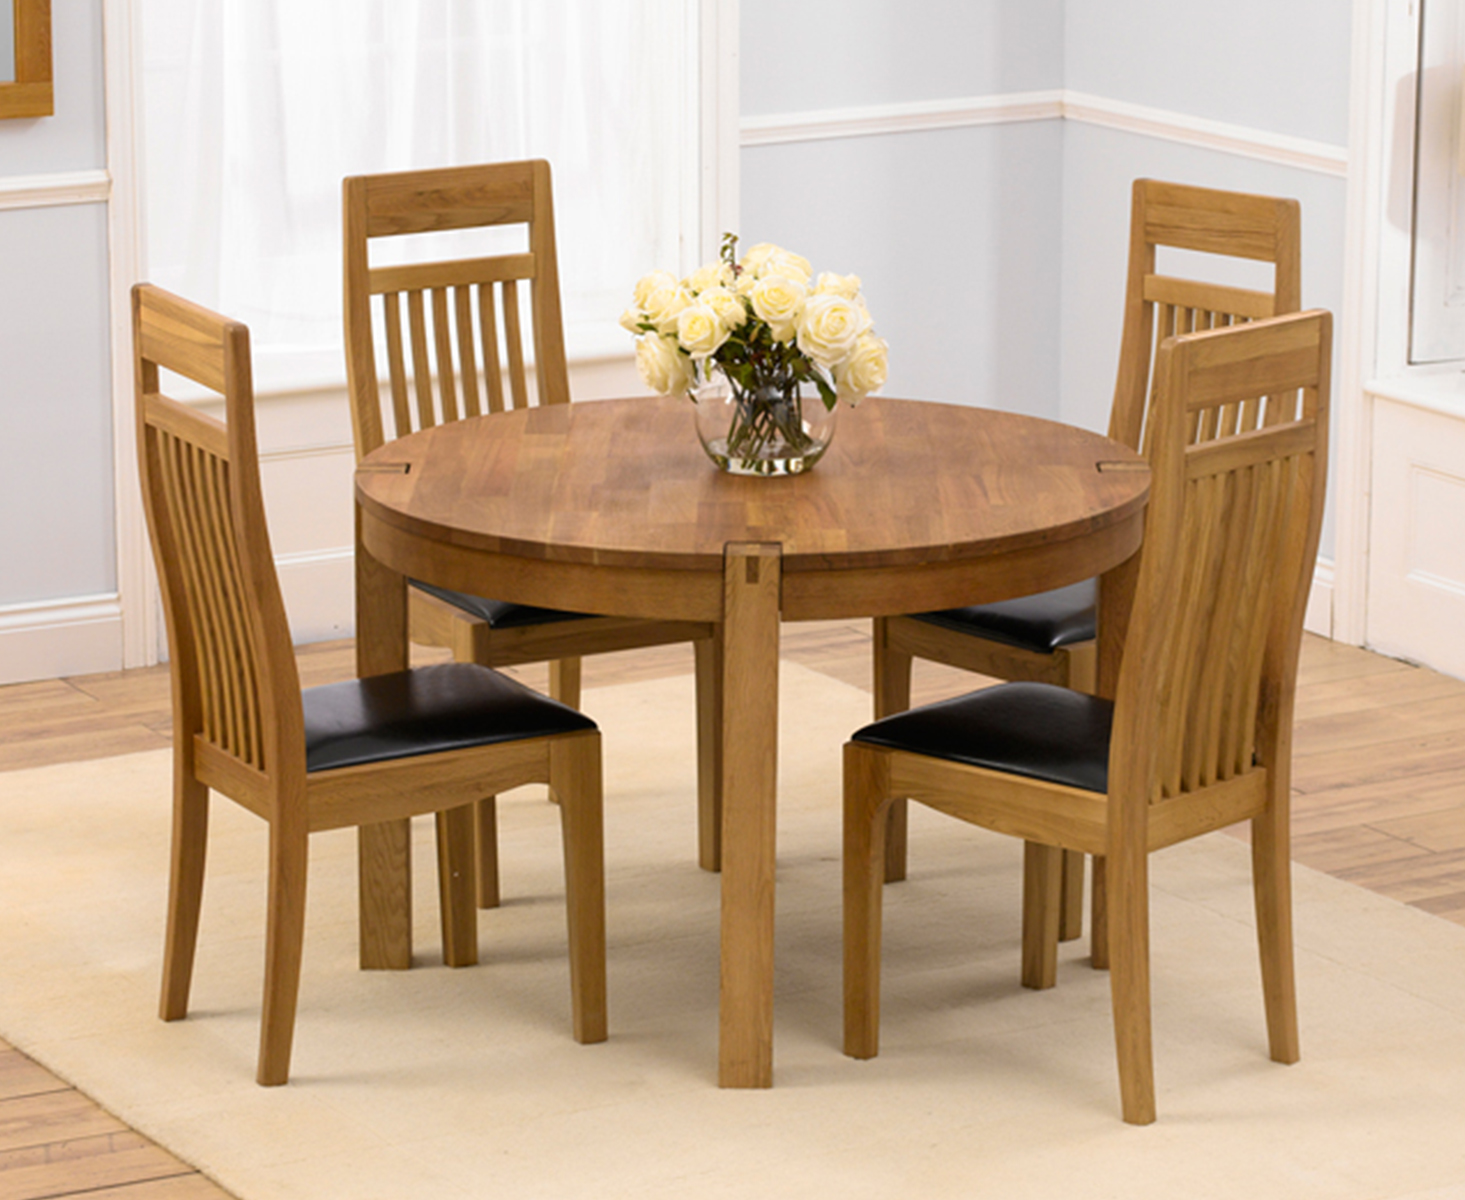 Verona 110cm Solid Oak Round Dining Table With 4 Cream Monaco Chairs